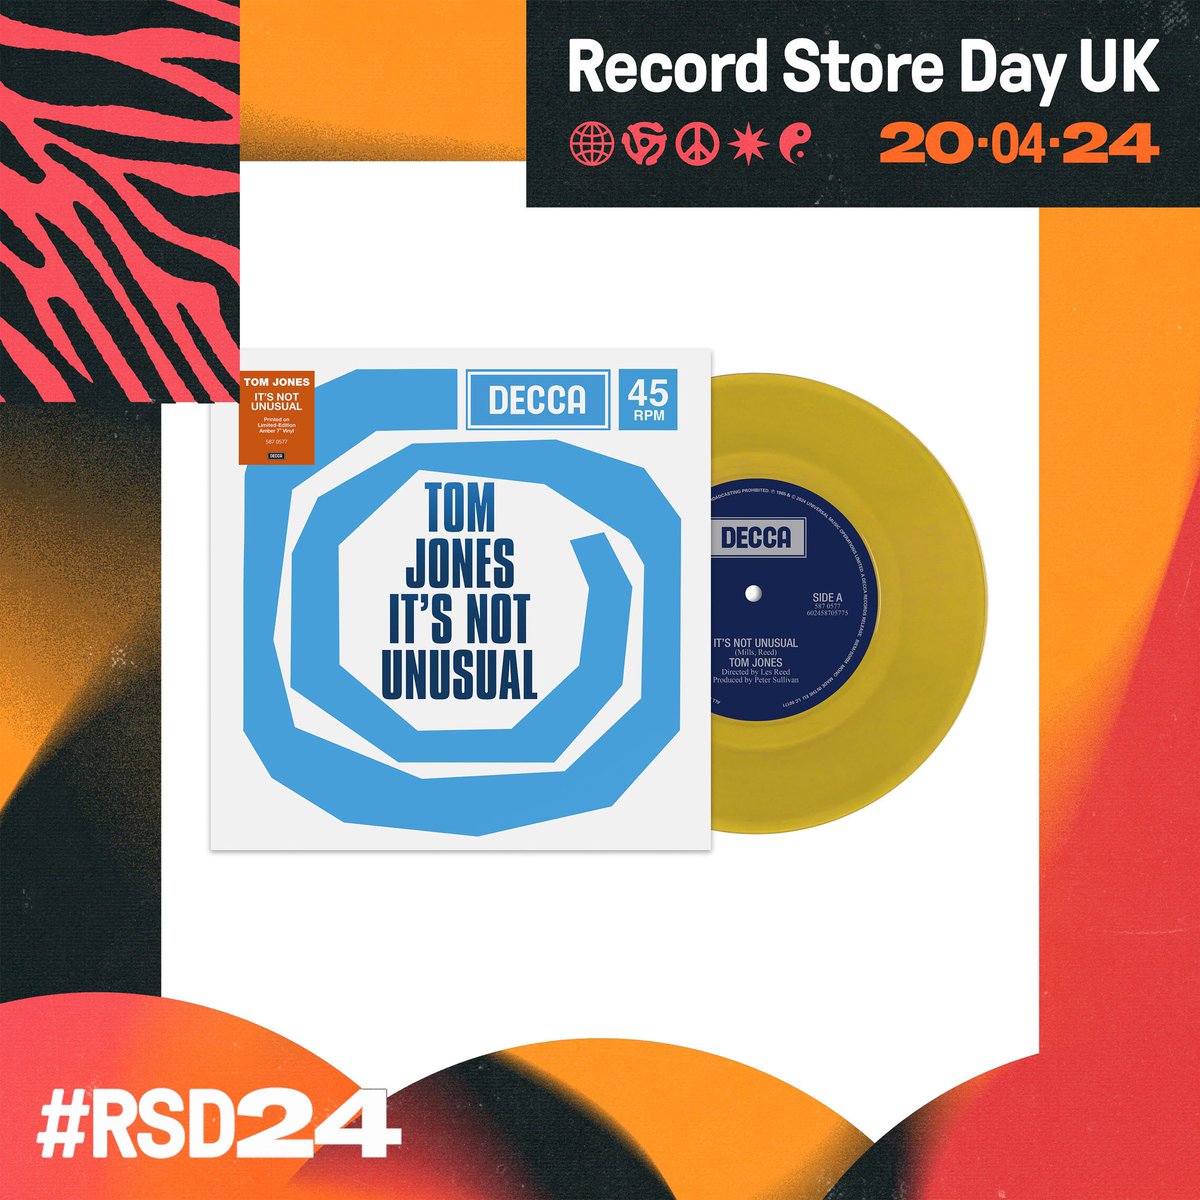 Today for @recordstoreday a very special release of It’s Not Unusual on limited edition 7” amber vinyl, the first time it’s been available since 1965! Find this unique piece of musical history at your local participating shop and join the party! #RSD24: recordstoreday.co.uk/stores/